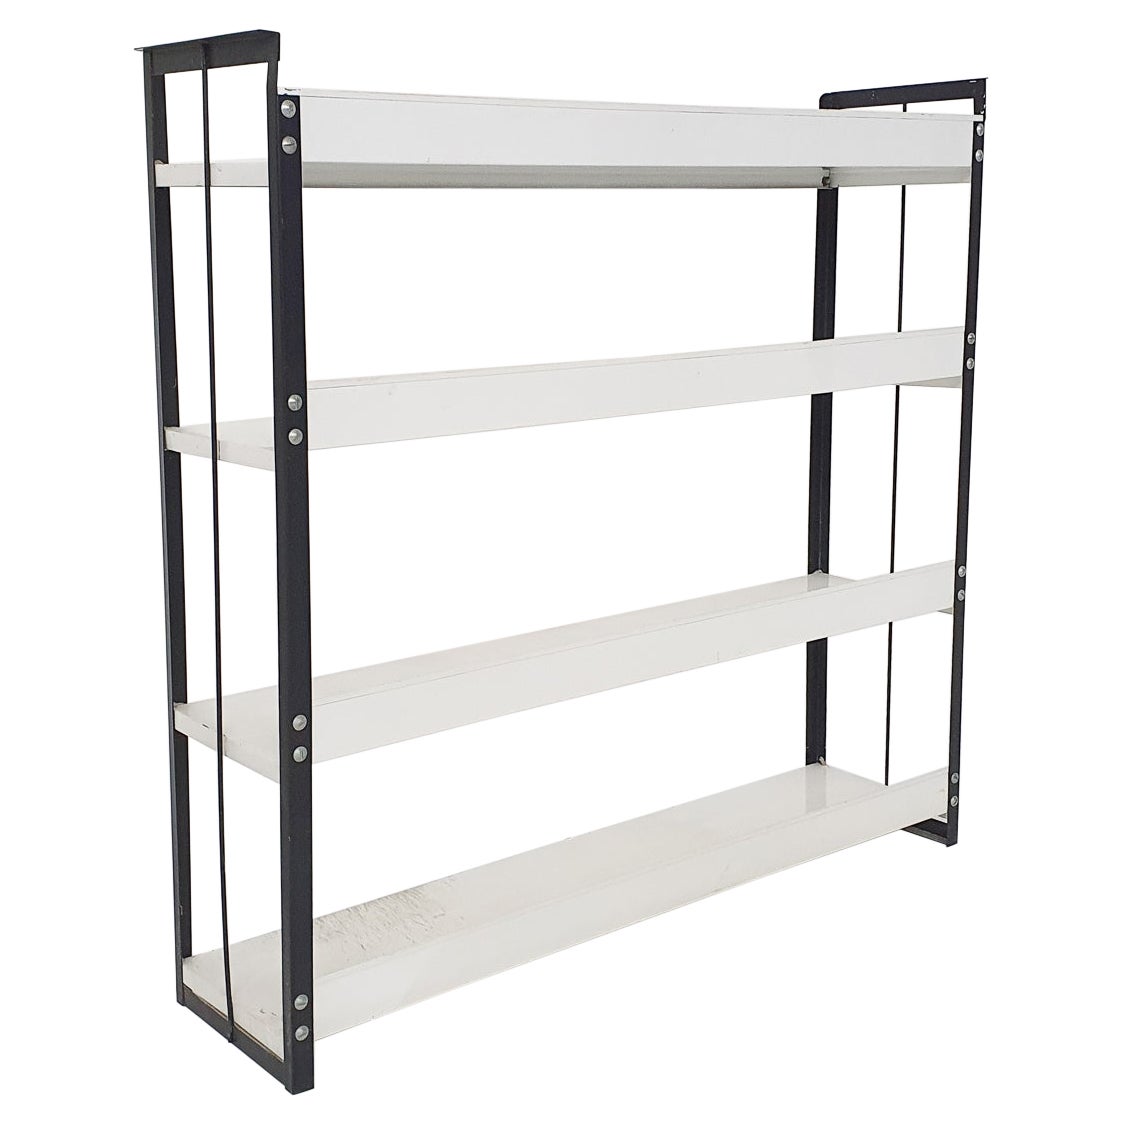 Black and White Metal Book Shelves Attrb. to Tomado, Holland, 1950's For Sale